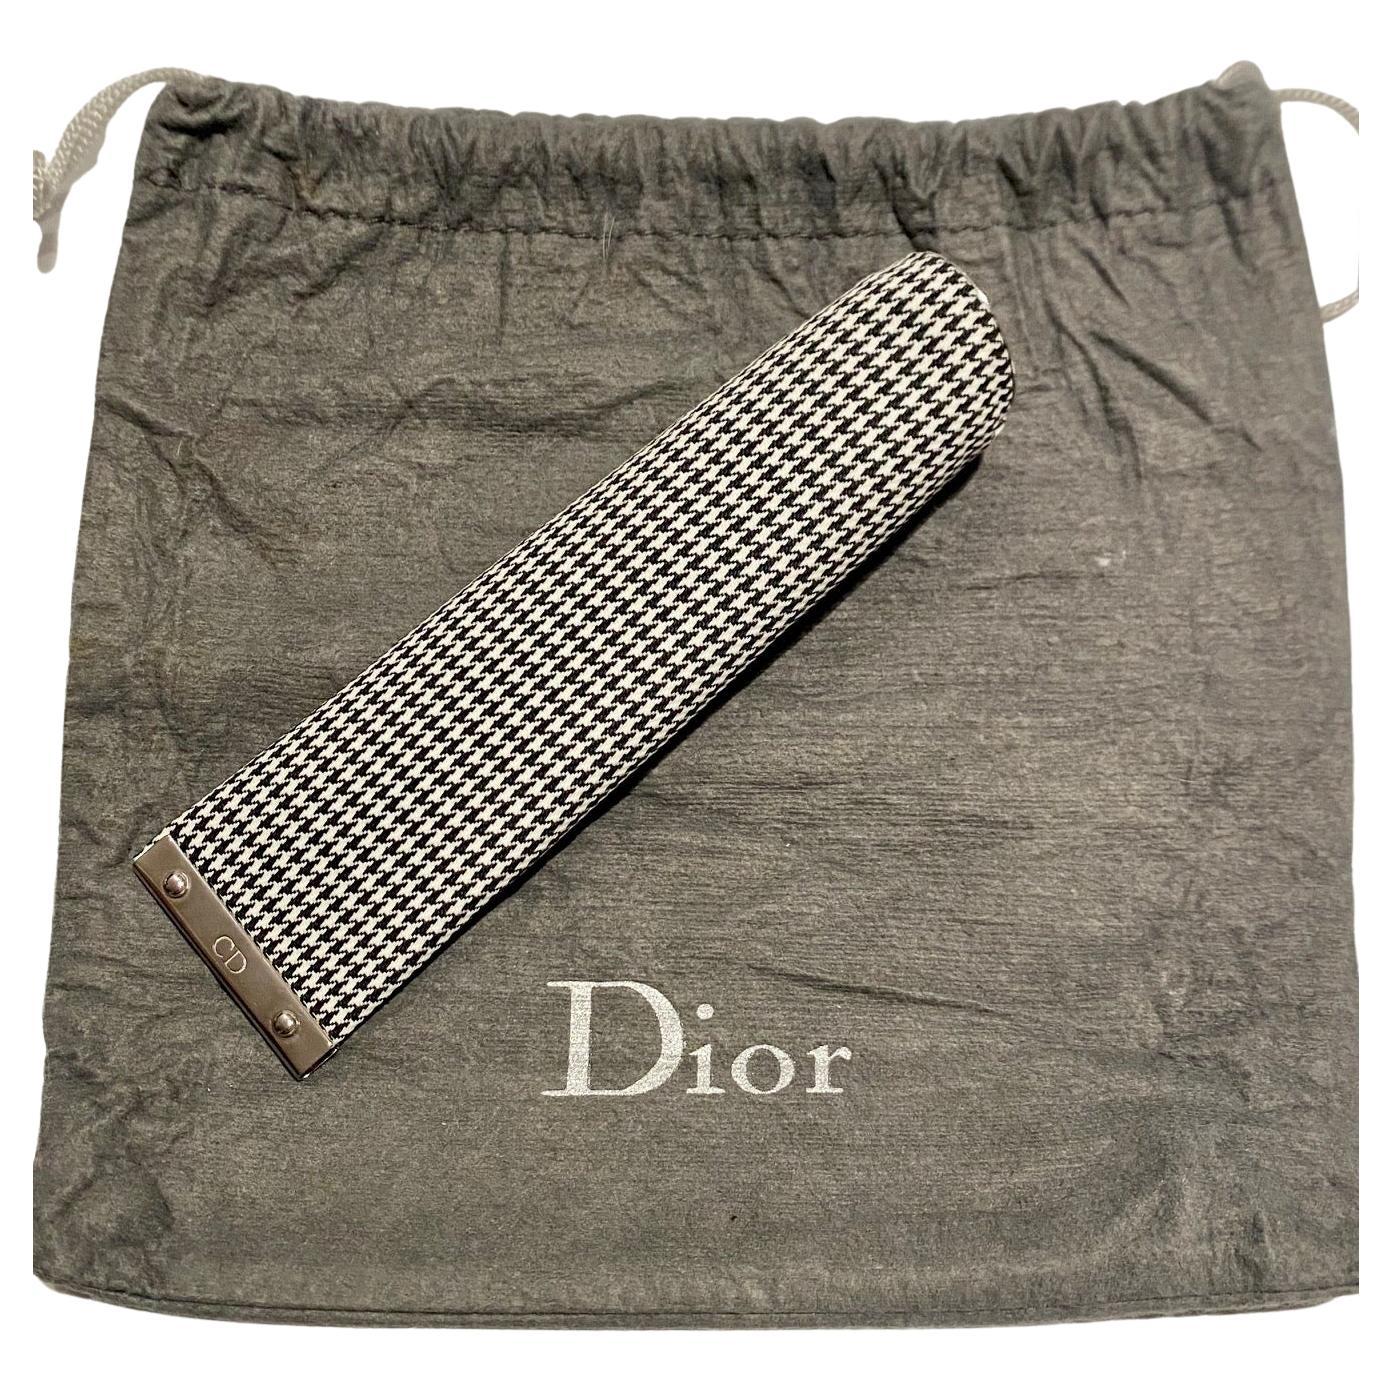 Christian Dior Dogtooth Toothpaste Tube Sleeve Cove, washable fabric, chrome clip at the bottom to release and insert tube; the sleeve cover securely contains the tube while providing a stylish touch to bathroom accessories. The clip feature aids in